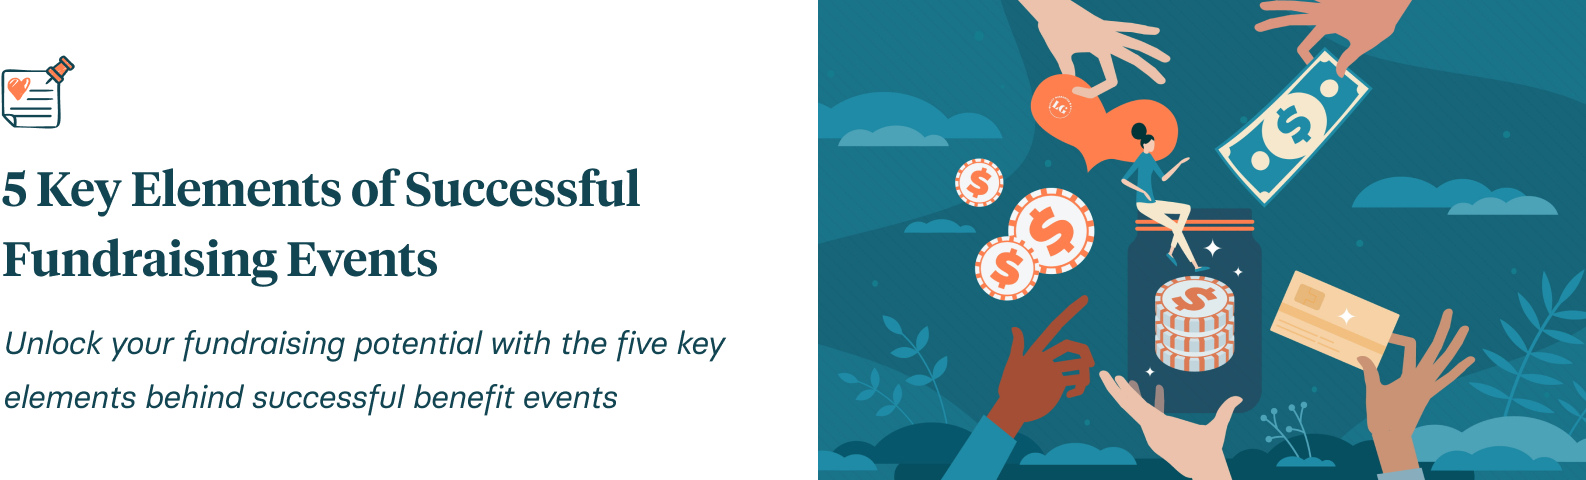 fundraising resource: five key elements of successful fundraising events